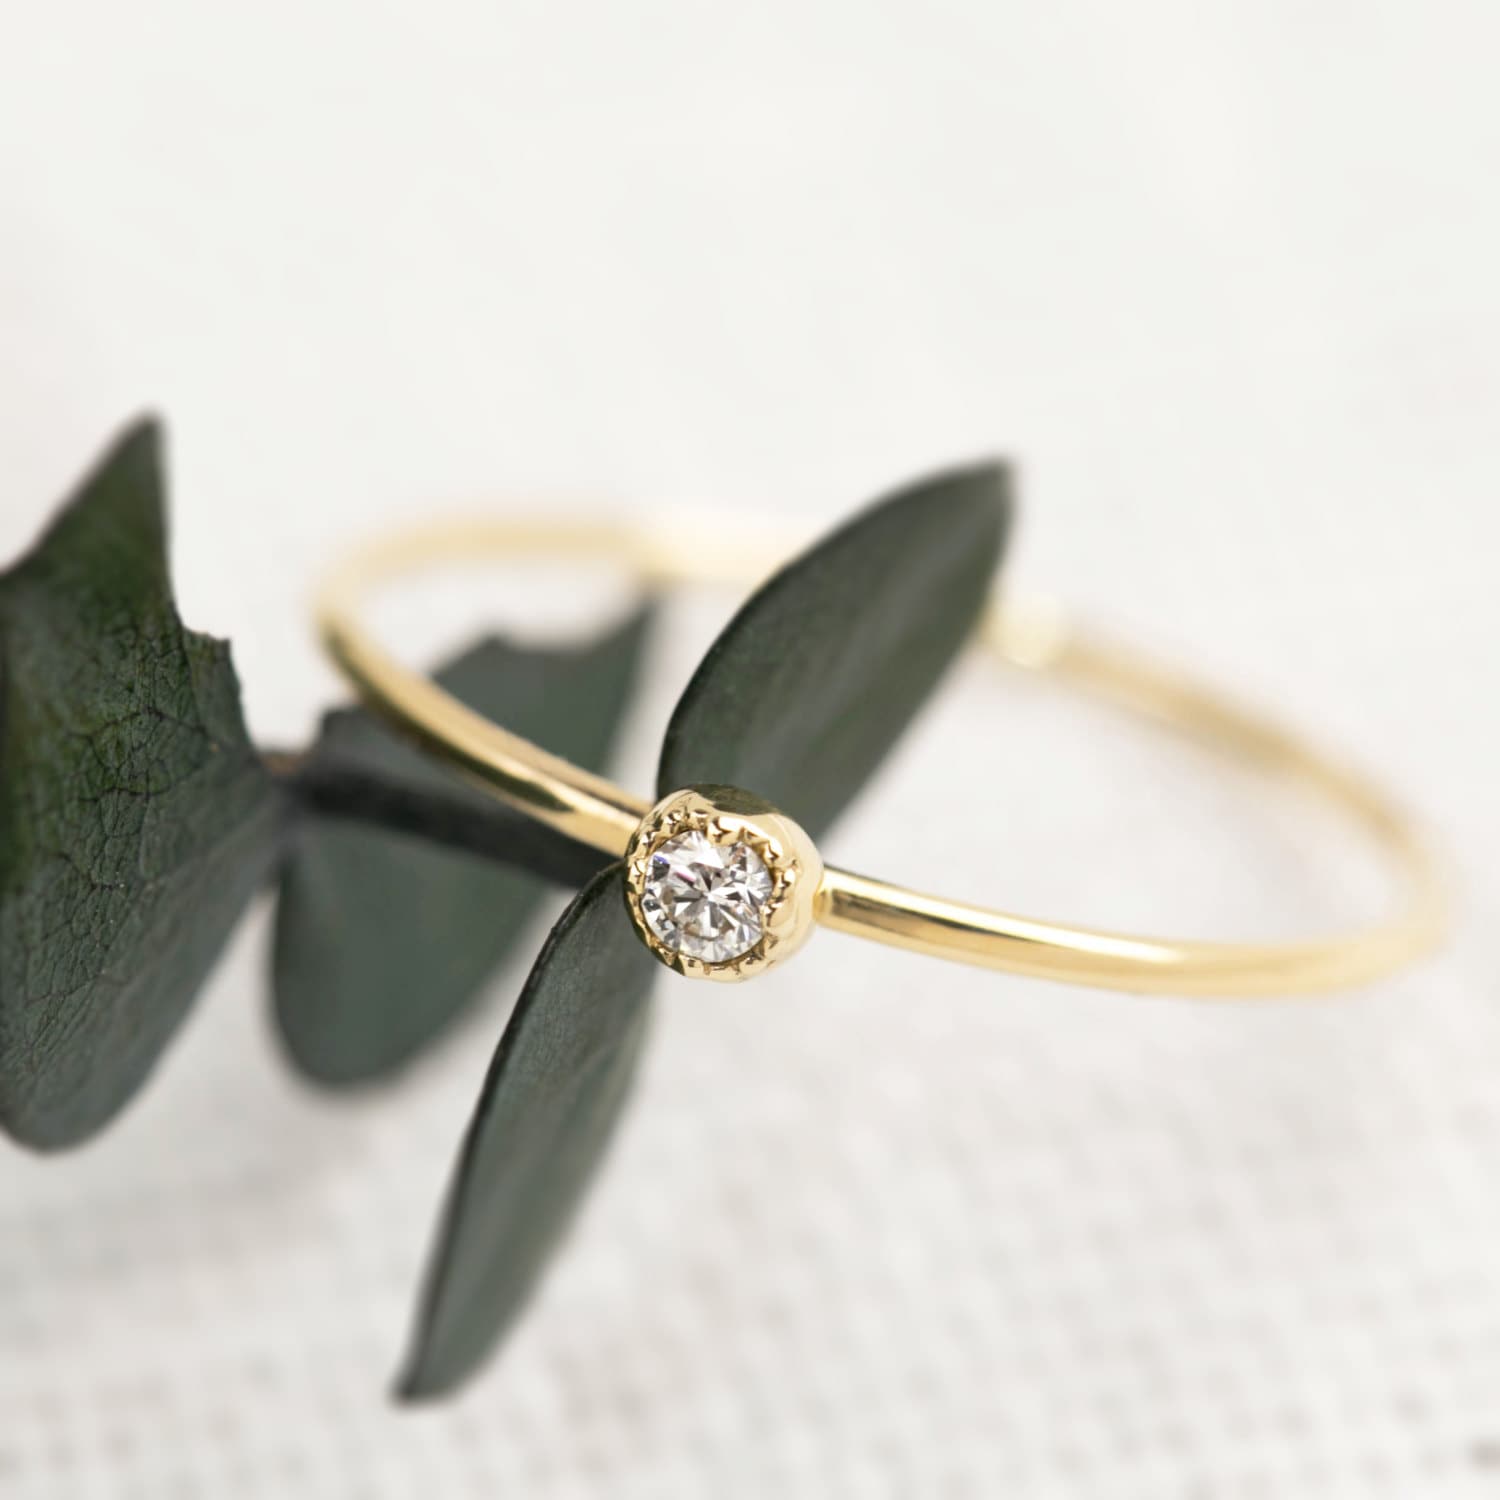 Minimalist Pave Engagement Ring - Audrey Ring - Do Amore